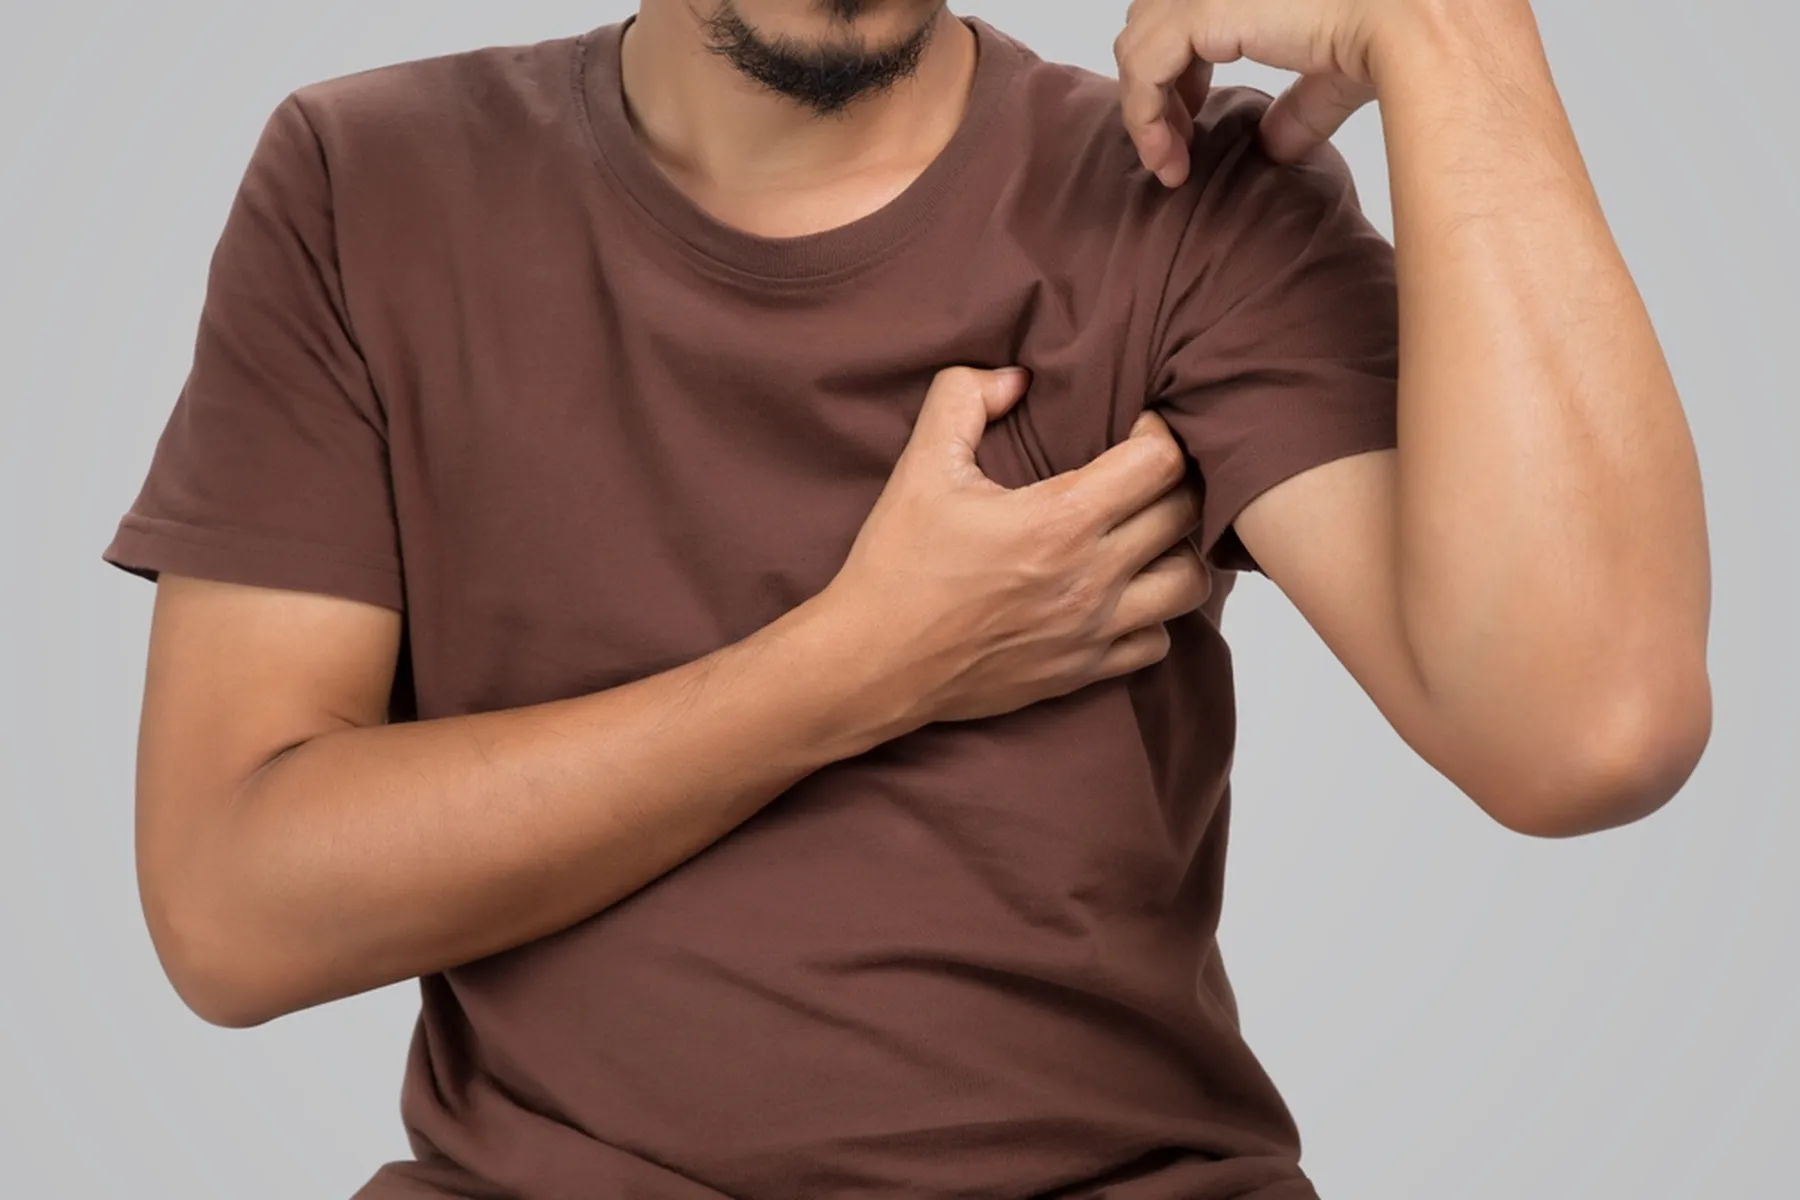 A man itches over his shirt in his armpit area.